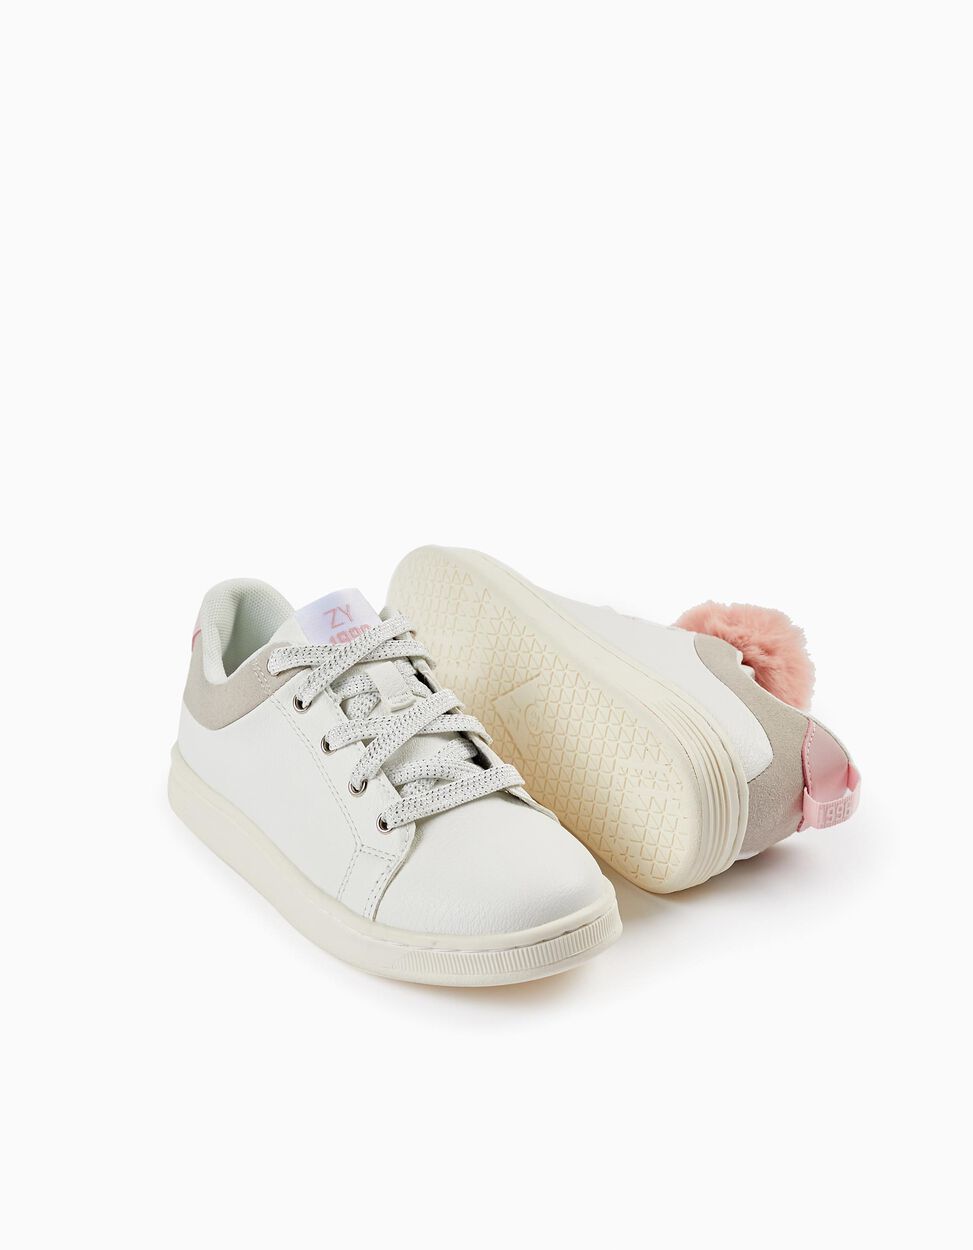 Buy Online Trainers with Pompons for Girls 'ZY 1996', White/Pink